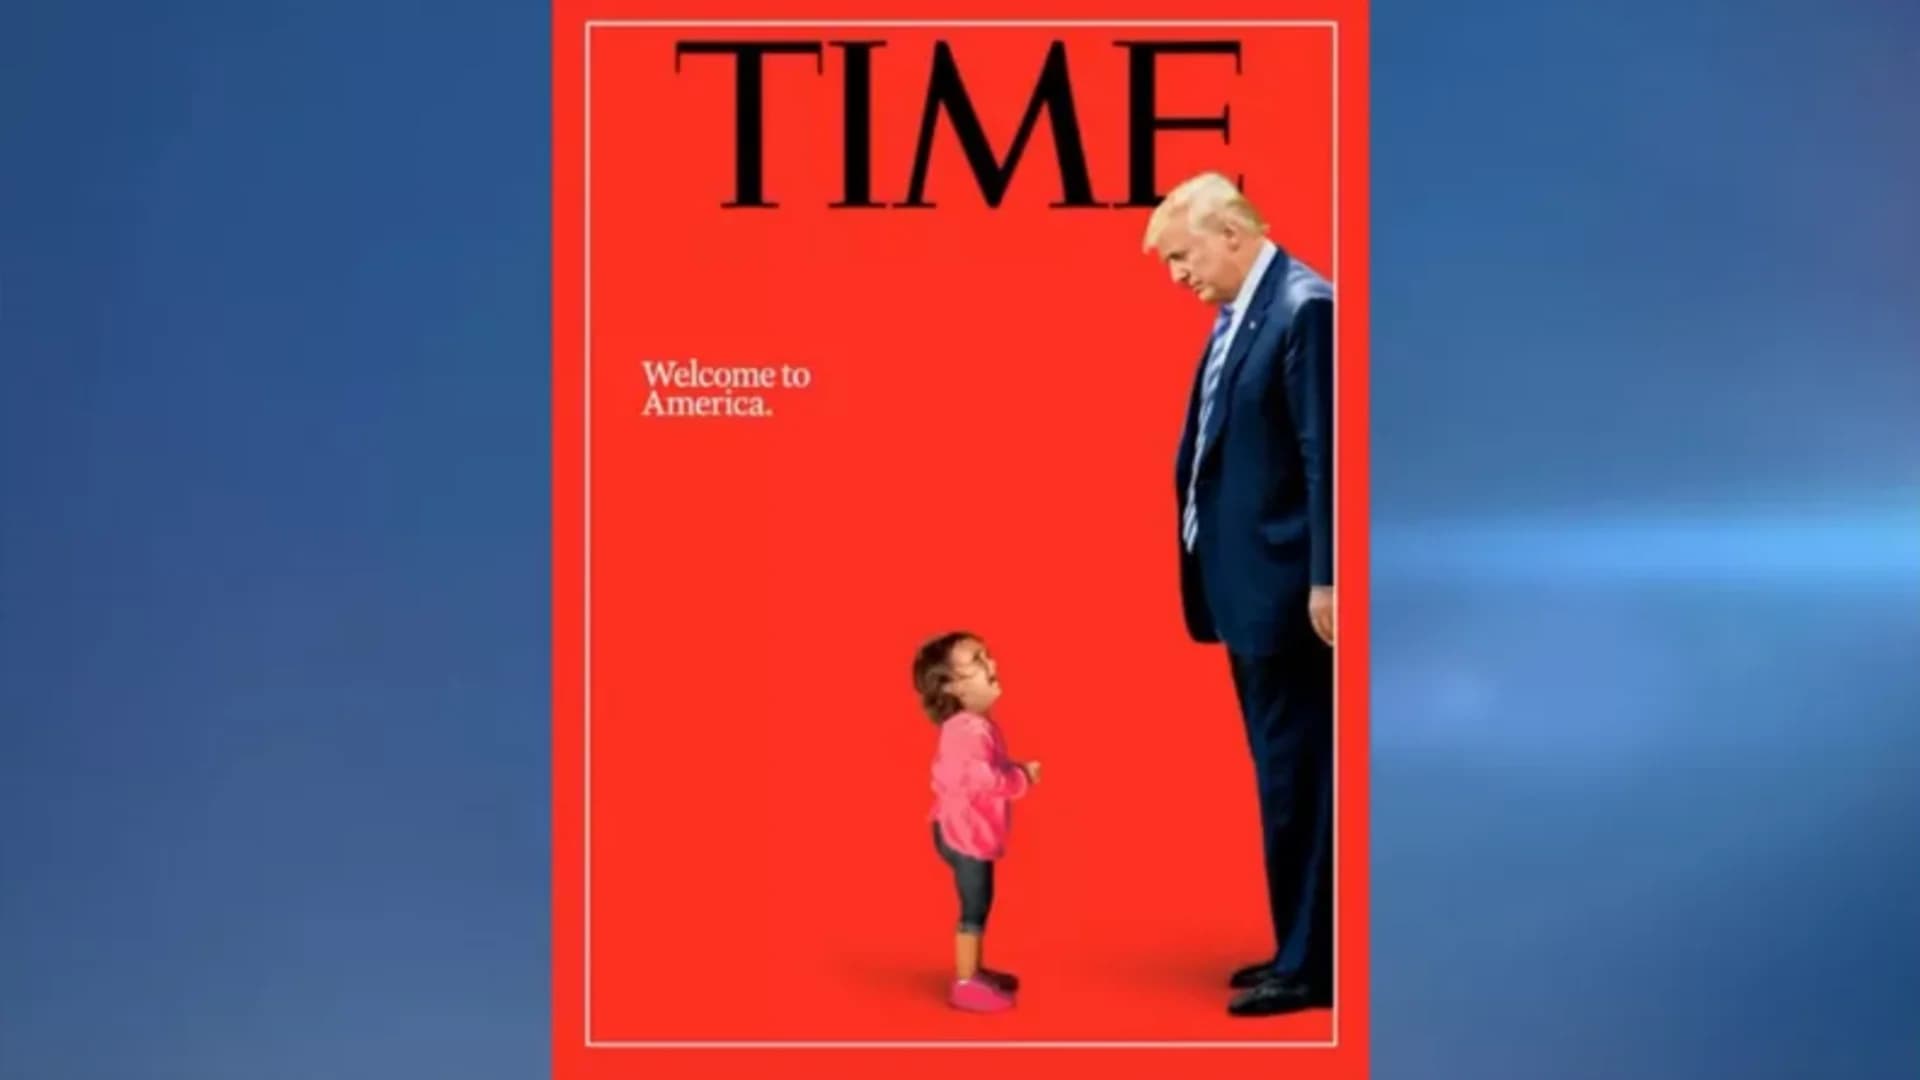 Time Magazine July 2 cover includes Trump, crying child